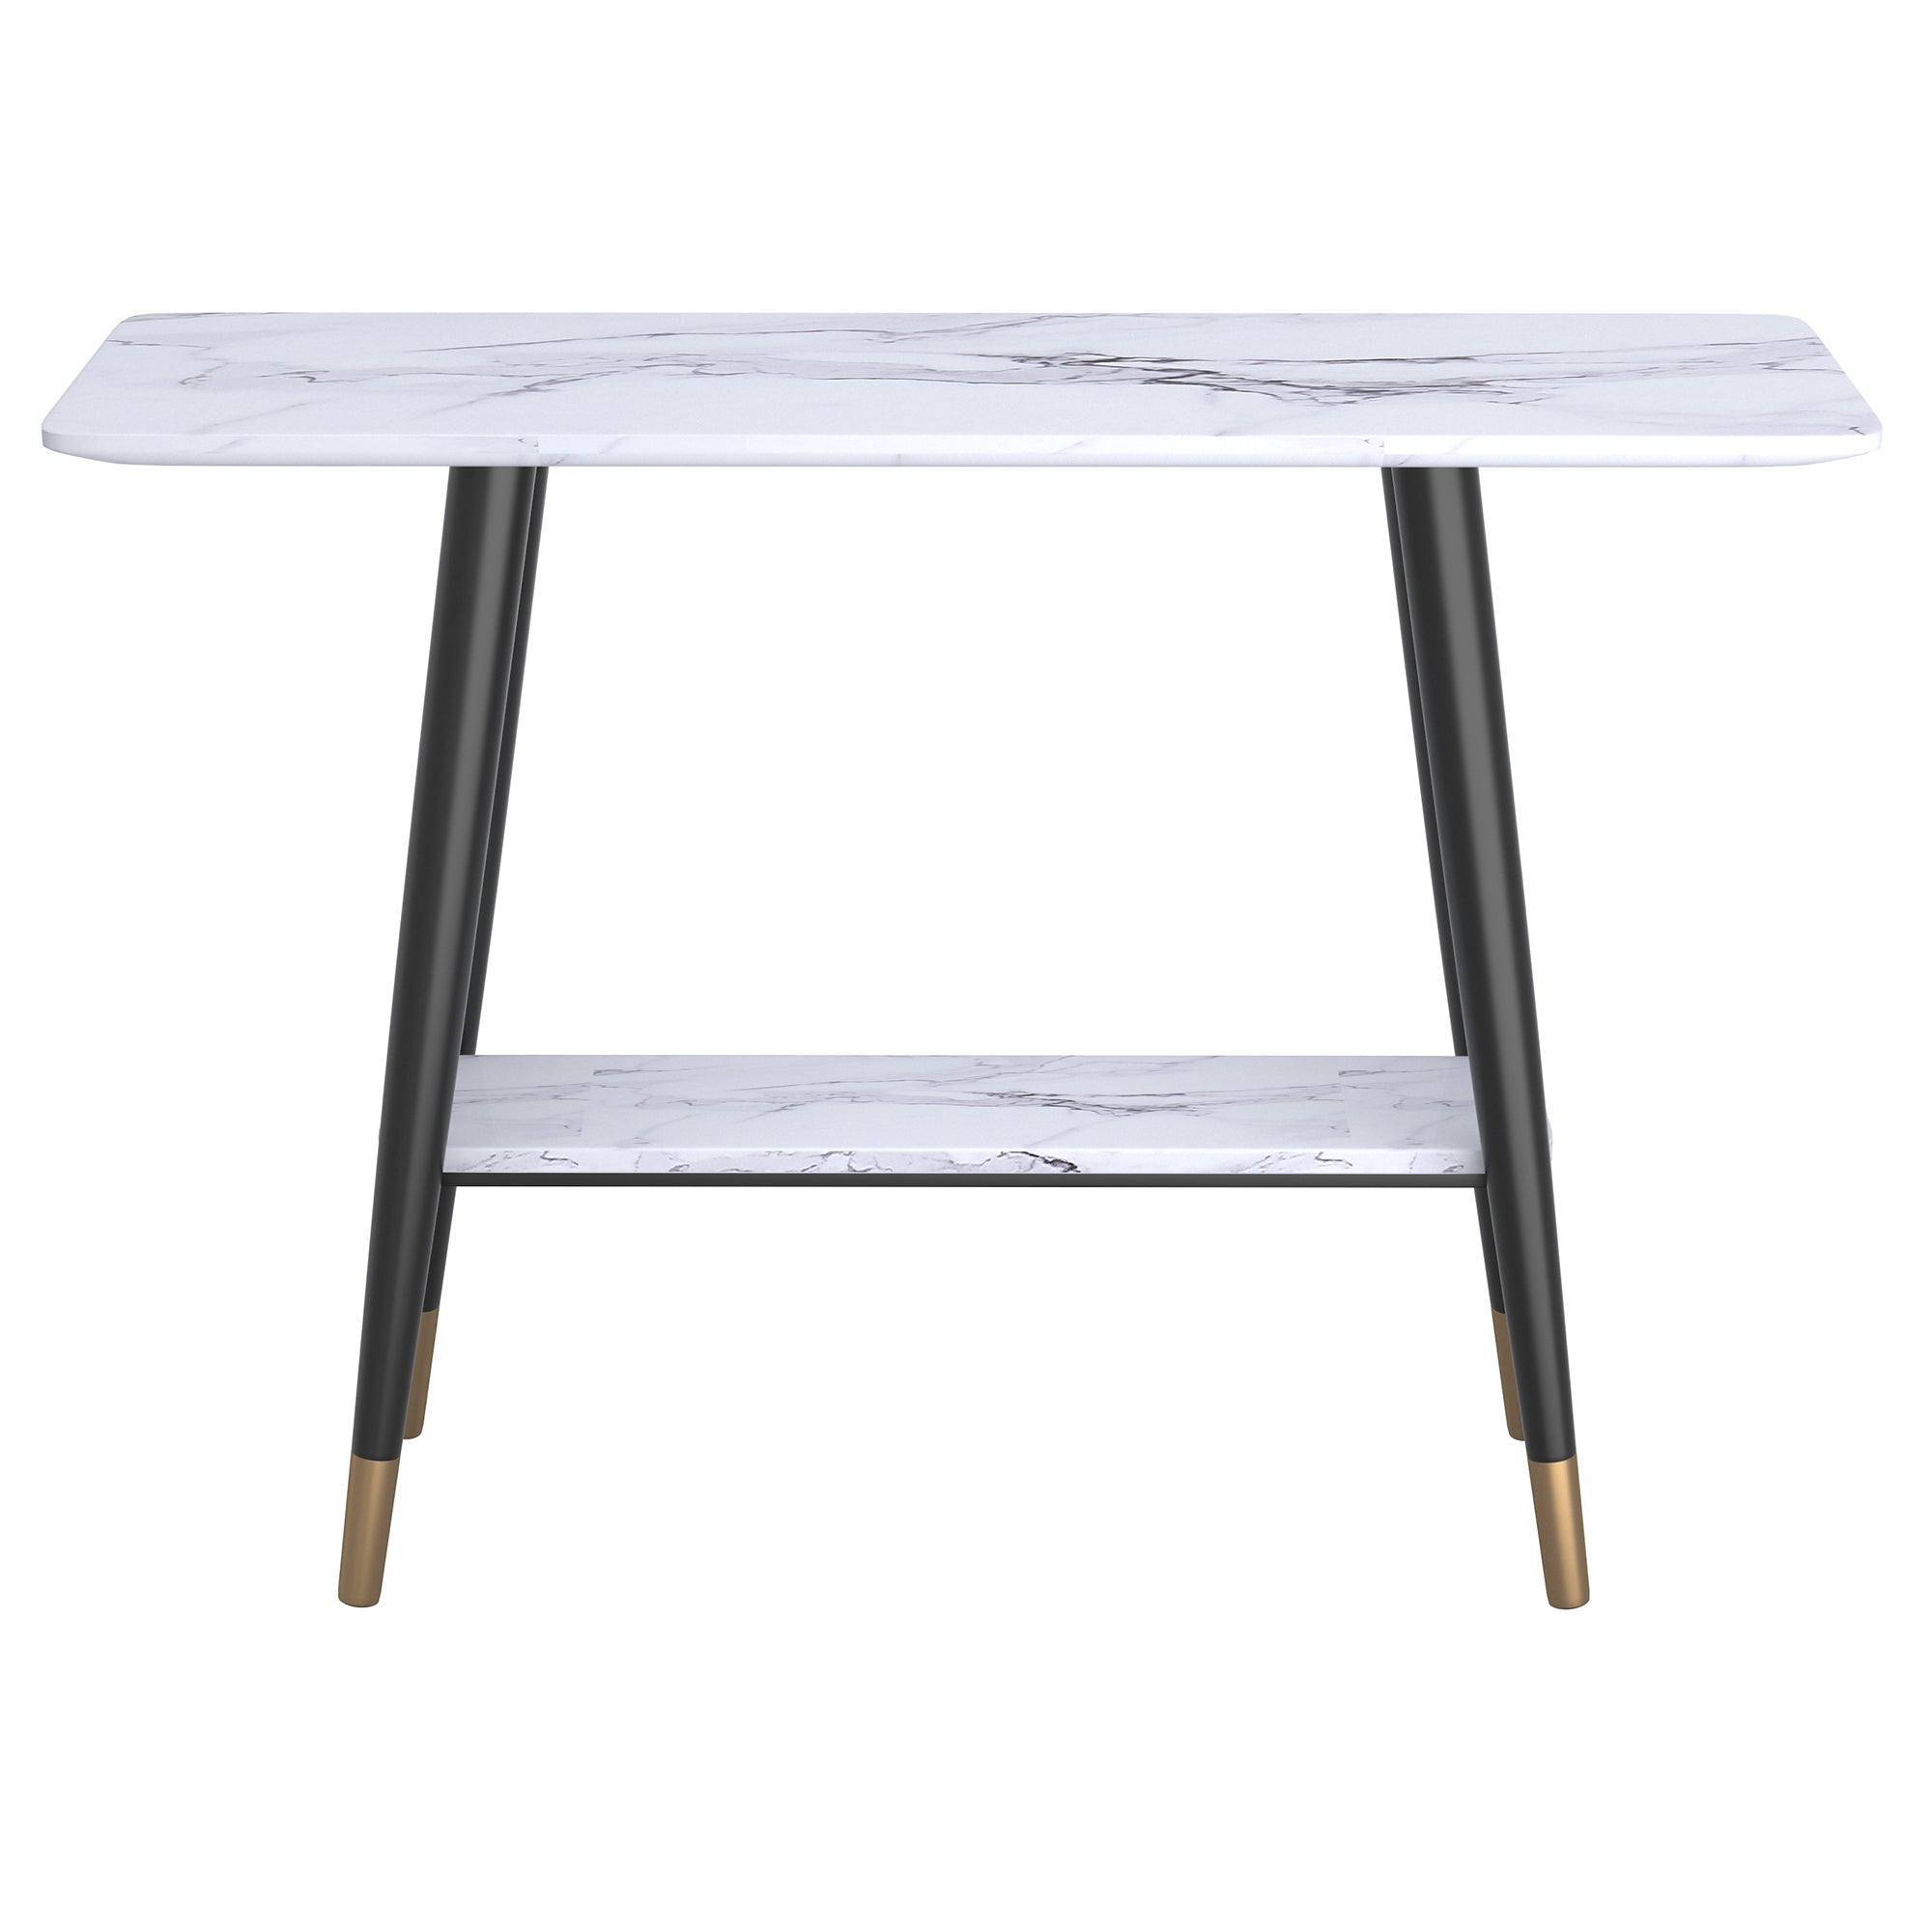 Emery 2-Tier Console Table in White Faux Marble